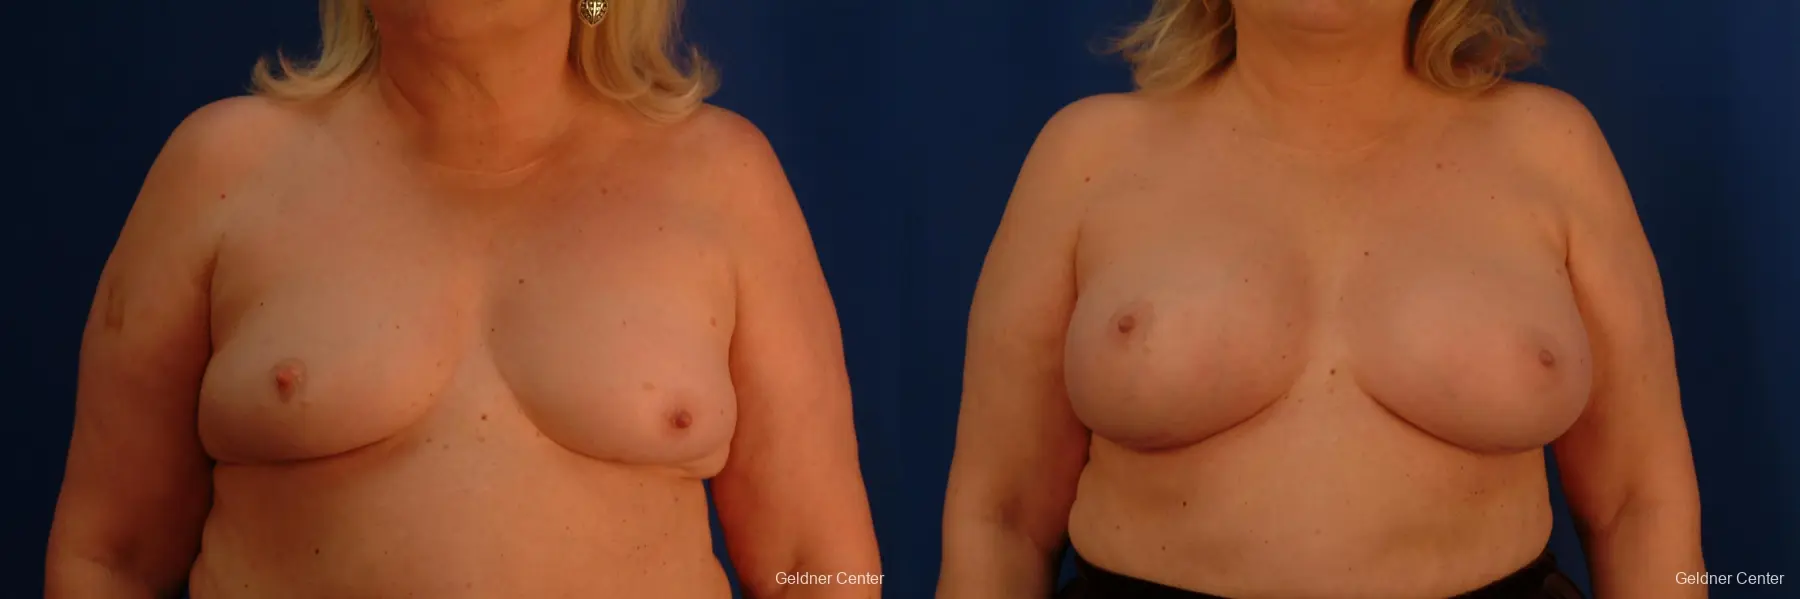 Complex Breast Augmentation Hinsdale, Chicago 2430 - Before and After 1